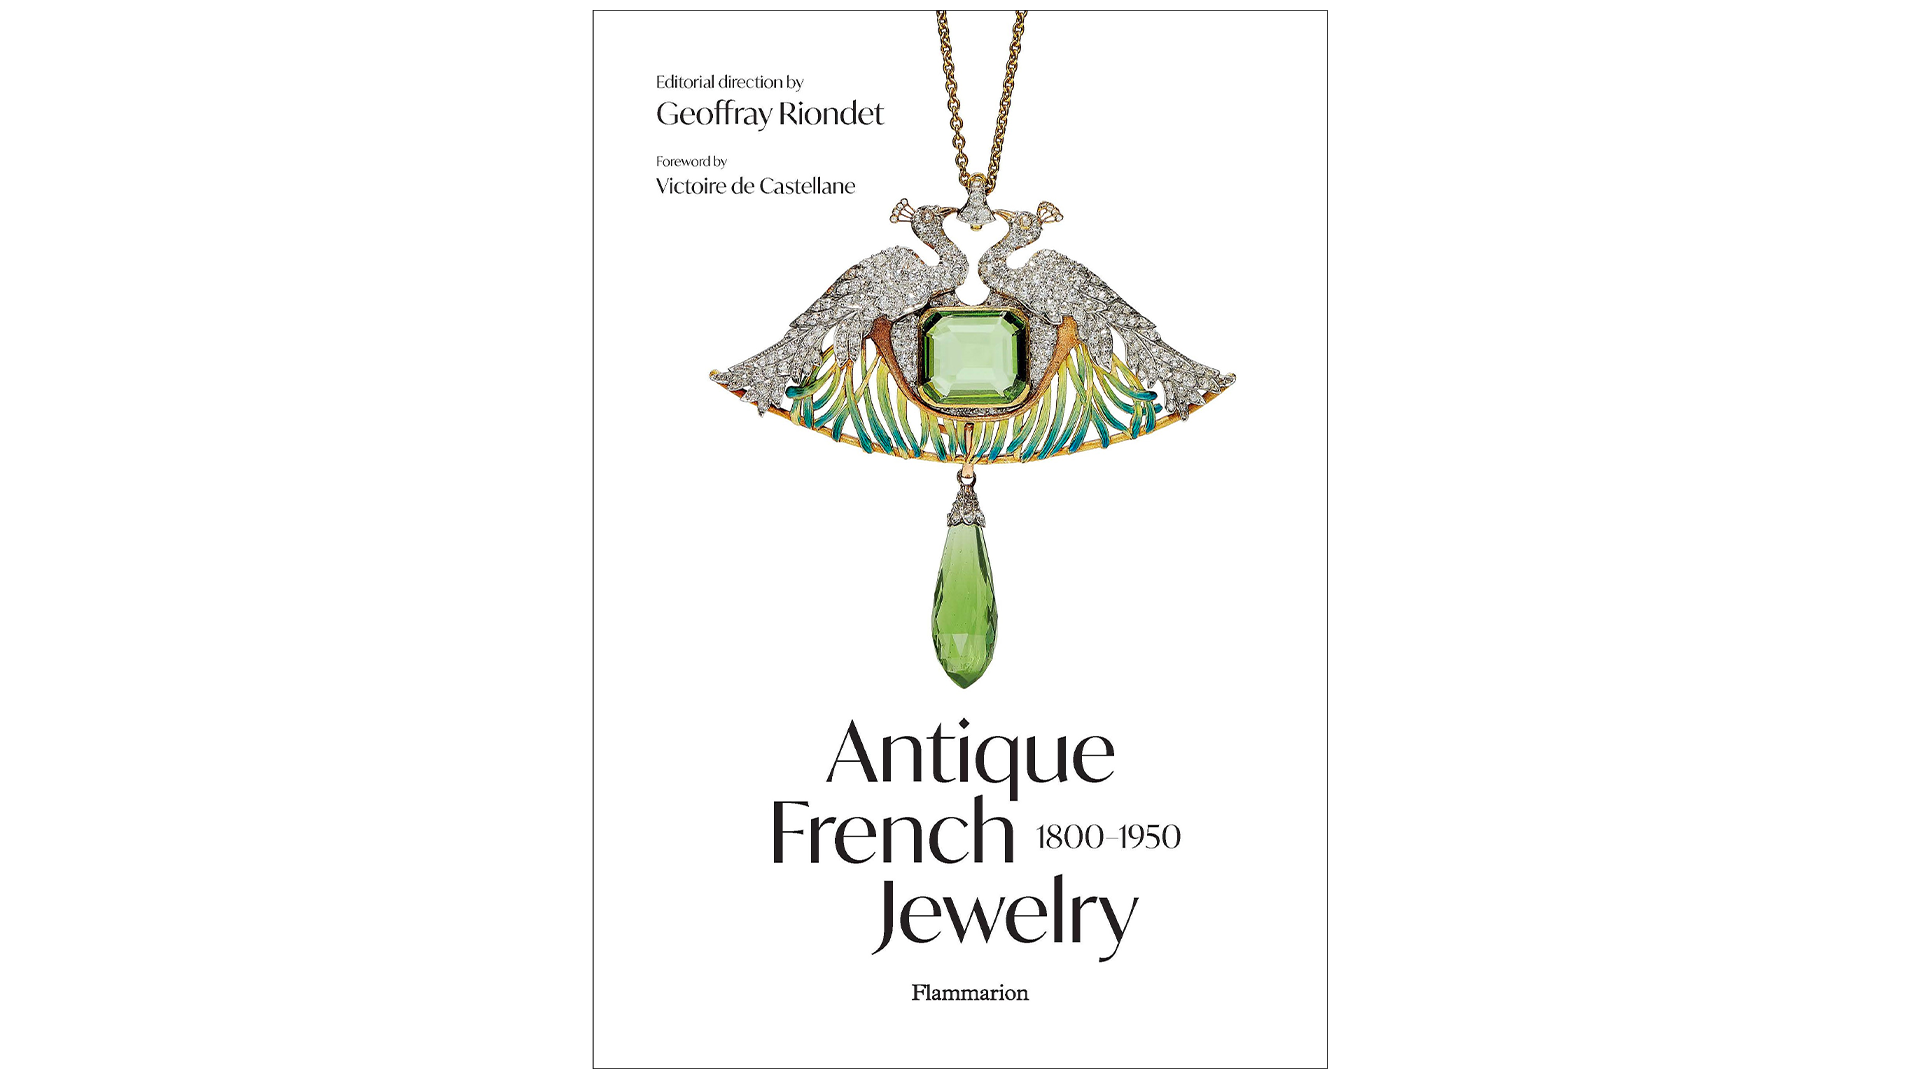 Cover, Antique French Jewelry: 1800- 1950, Flammarion, authored by Geoffray Riondet.